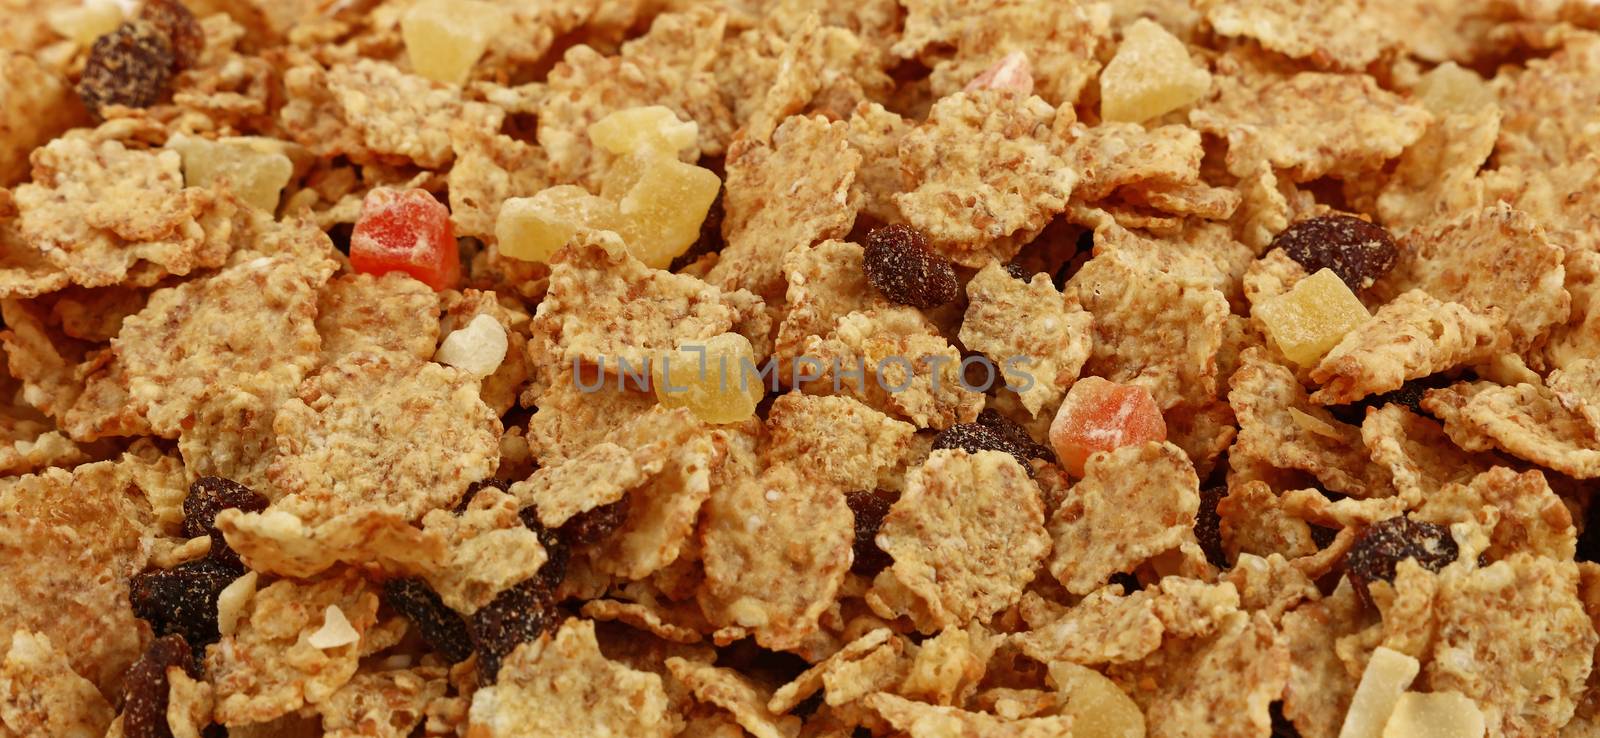 Granola muesli with dried fruits close up by BreakingTheWalls